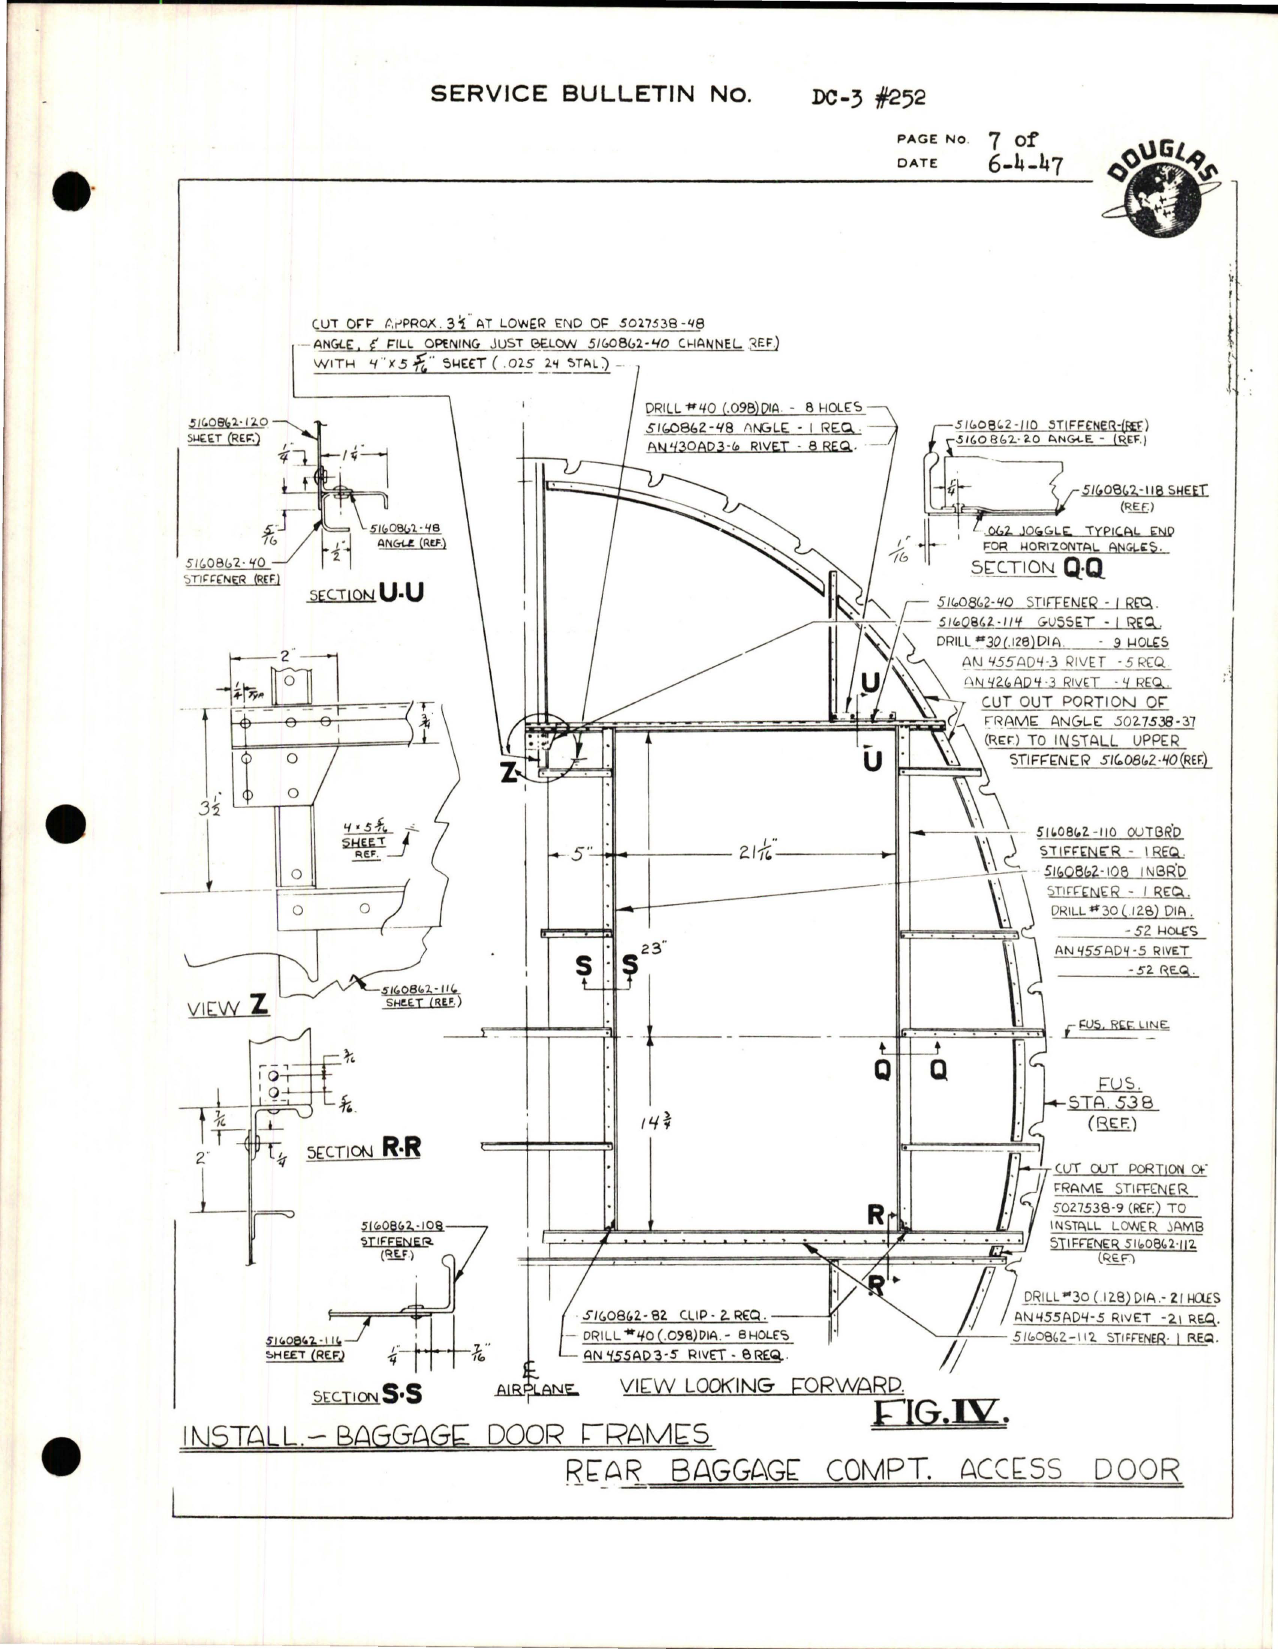 Sample page 7 from AirCorps Library document: Rear Baggage Compartment Access Door Vent